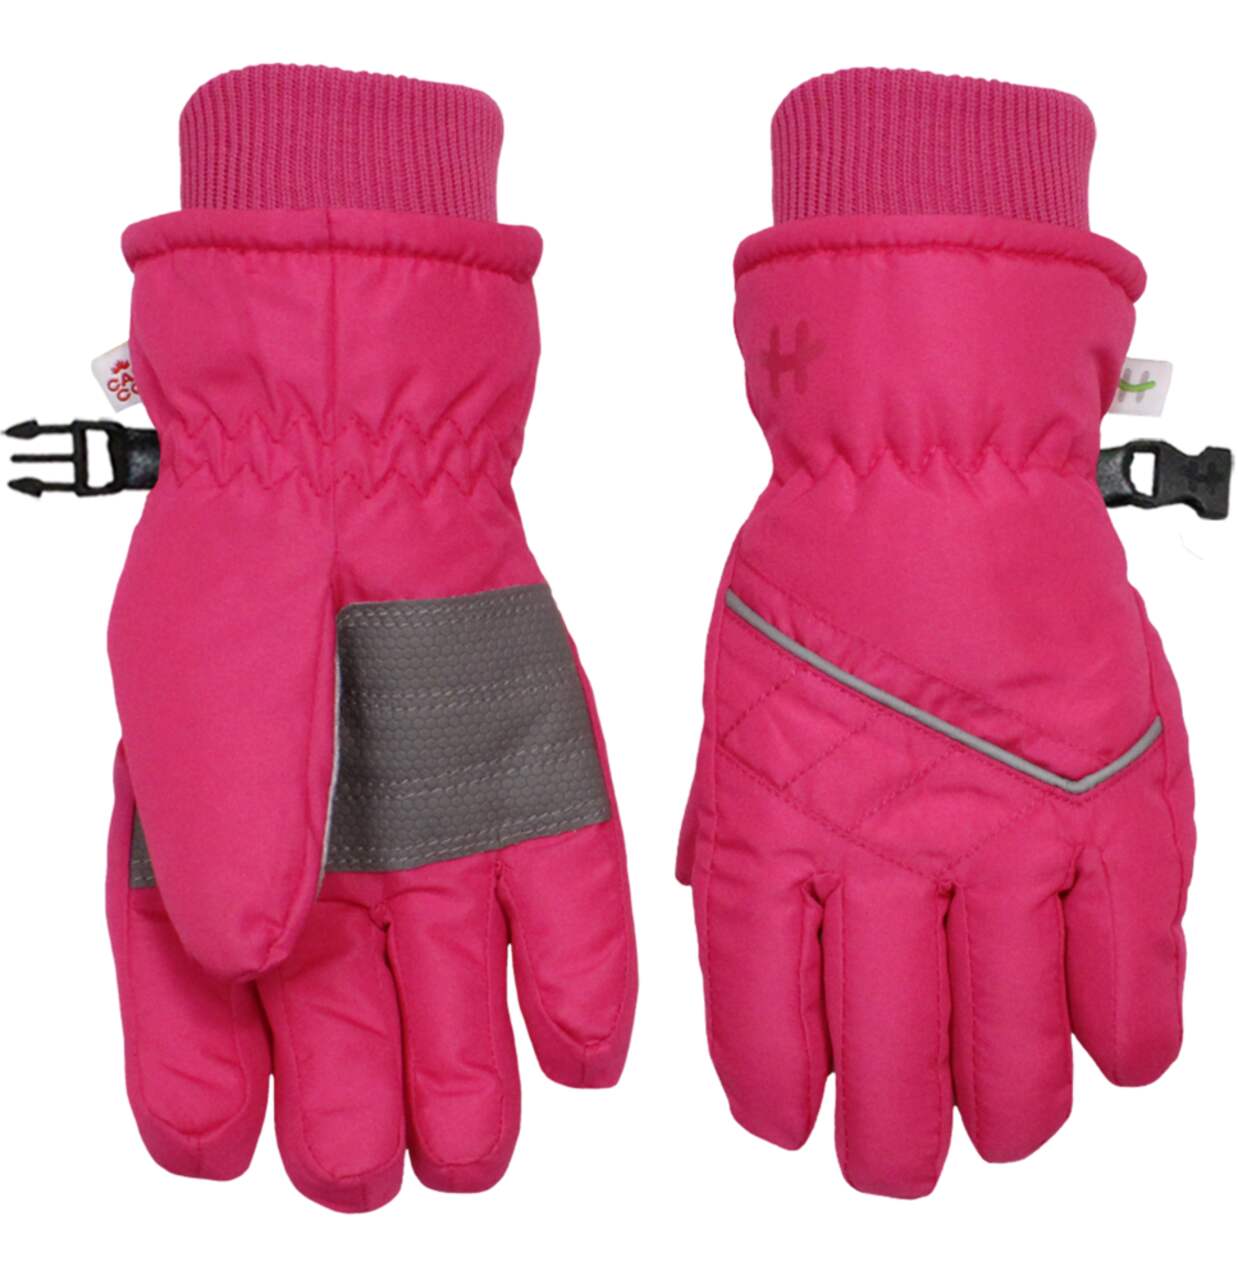 Winter Gloves Waterproof - Touchscreen Compatible Ski Gloves Insulation  Kids Winter Gloves Hand Warmer For Ice Fishing Skiing